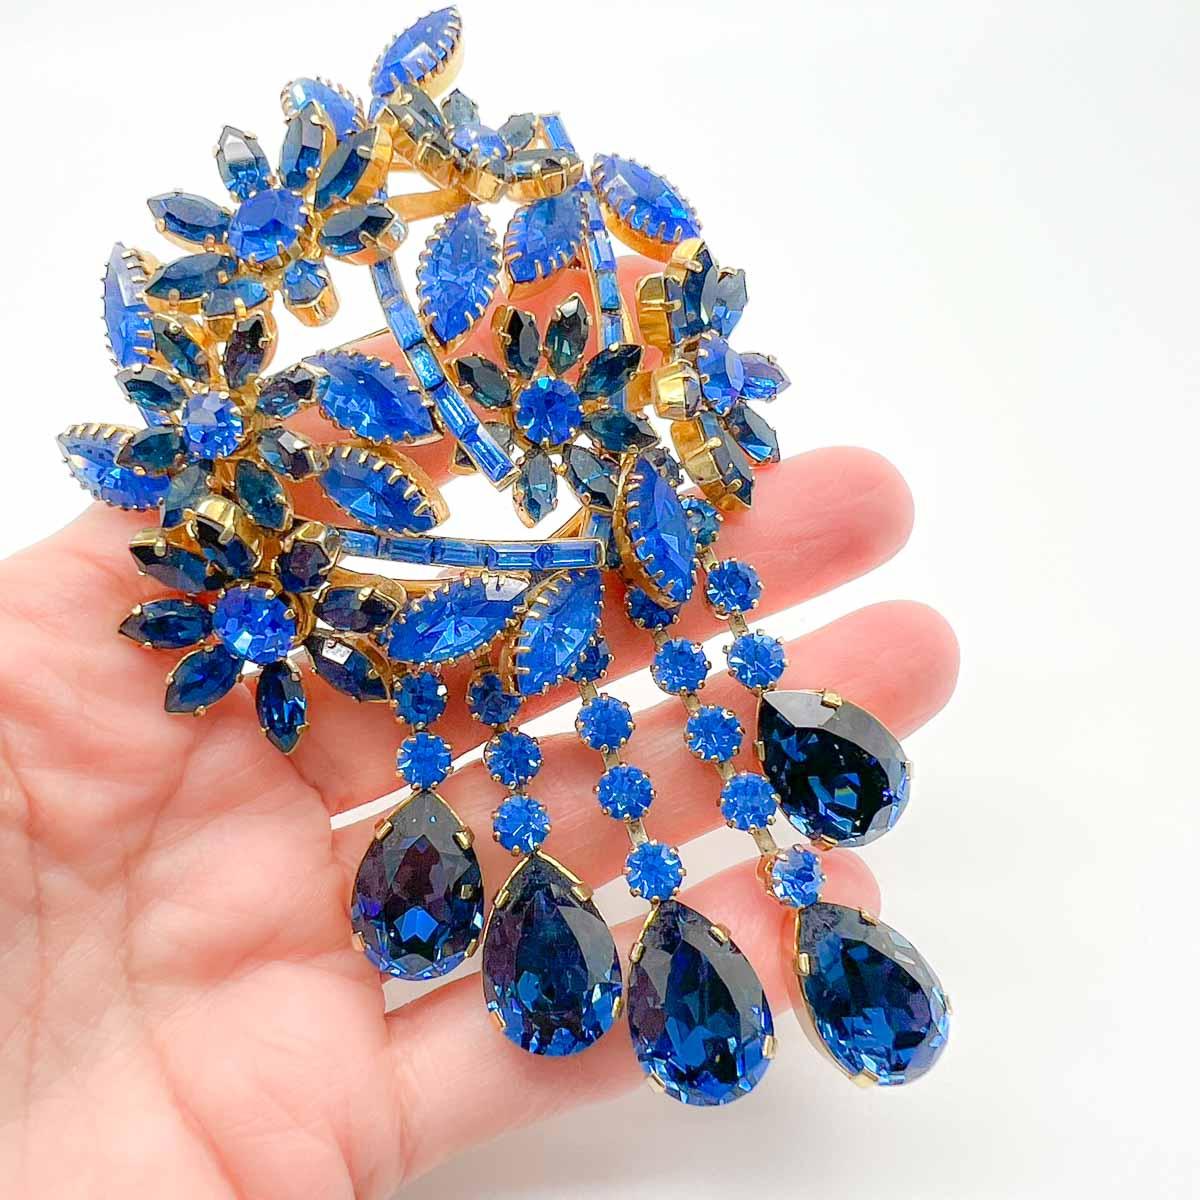 A spectacular work of wearable art. A huge Vintage Fischland Schmuck Statement Brooch. This mid-century Austrian crystal brooch is exquisitely set with a myriad of fancy cut, deep and mid sapphire blue crystals, each individually claw set. The fancy